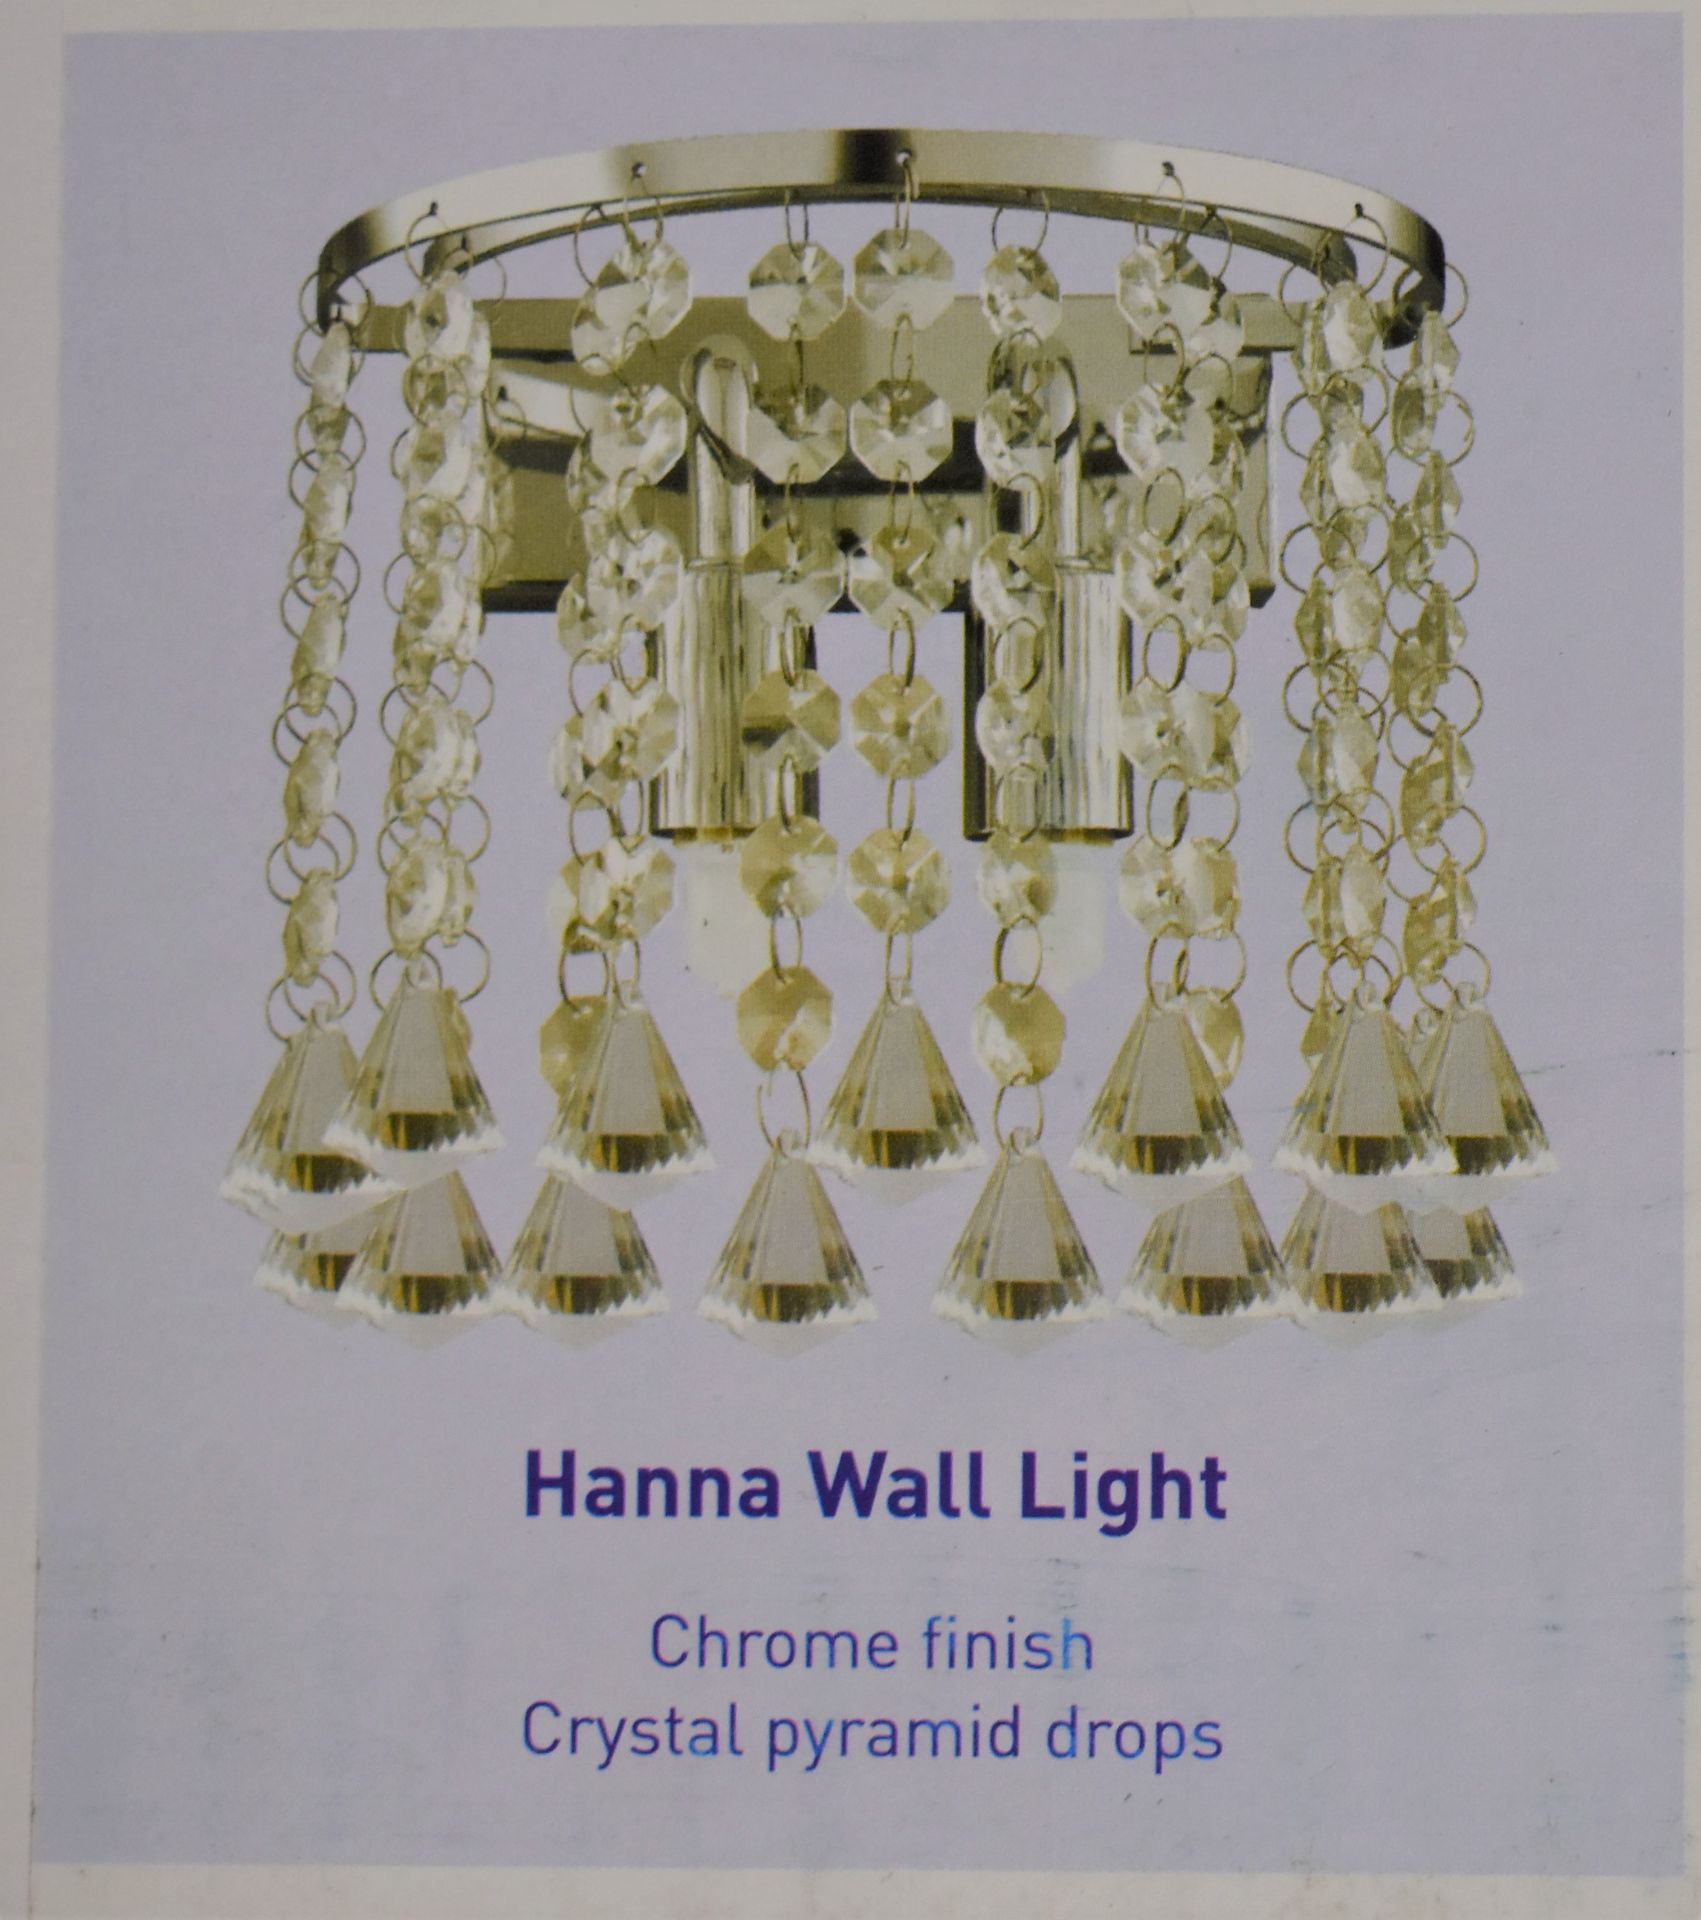 3 x Searchlight Hanna 2 Light Wall Lights in Polished Chrome With Crystal Pyramid Drops - Product